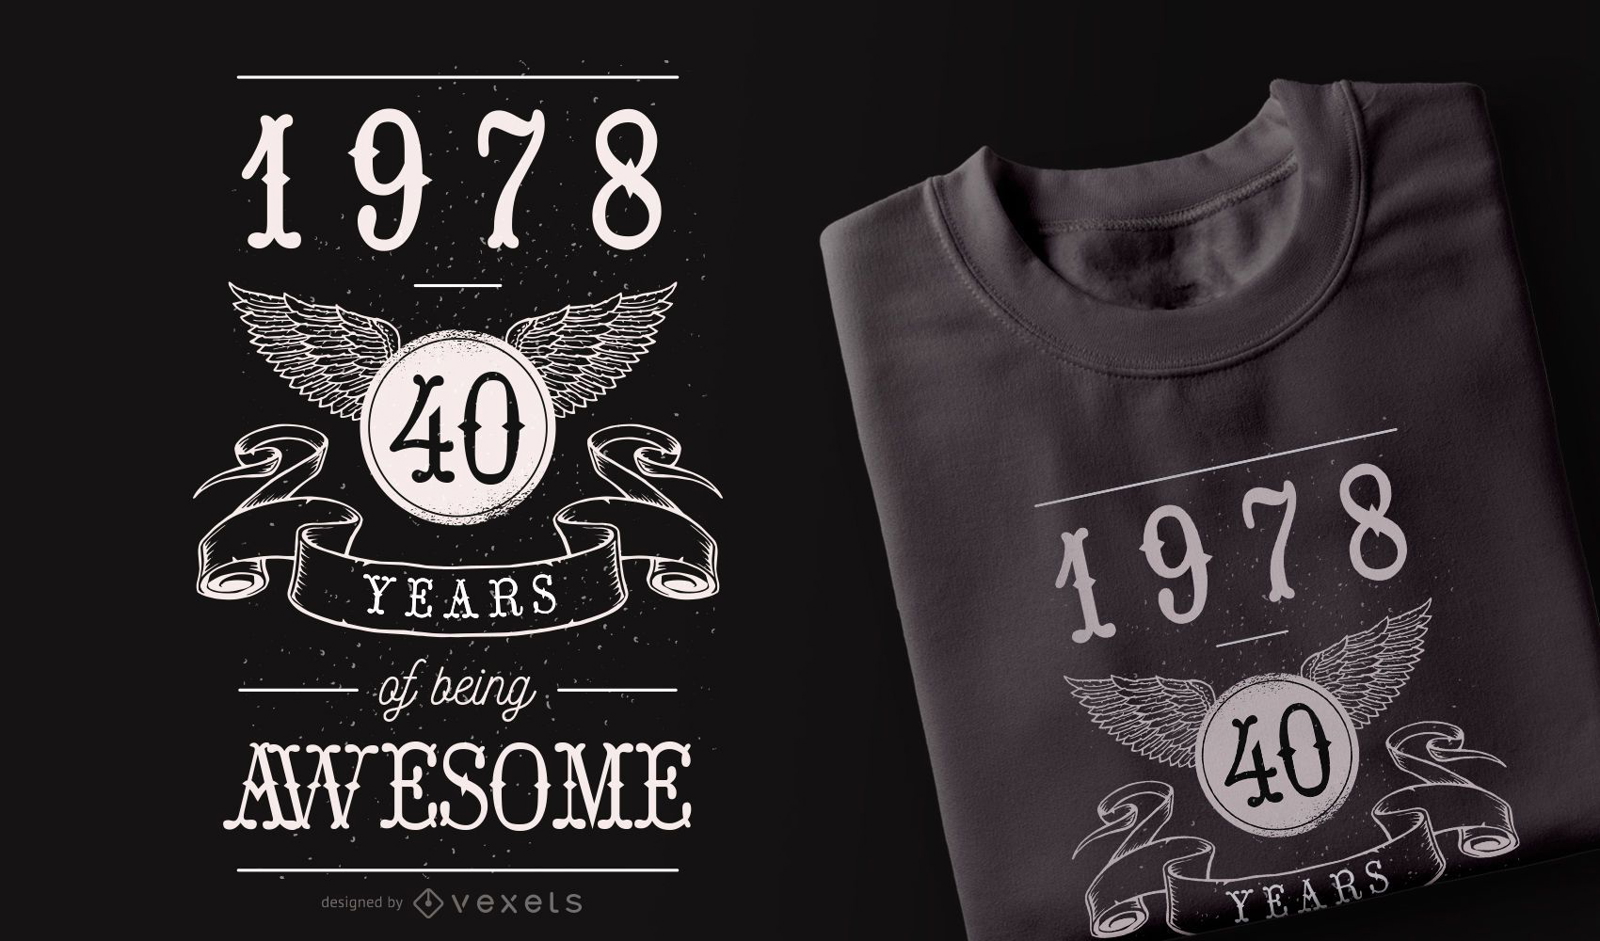 40 Years Awesome t-shirt design